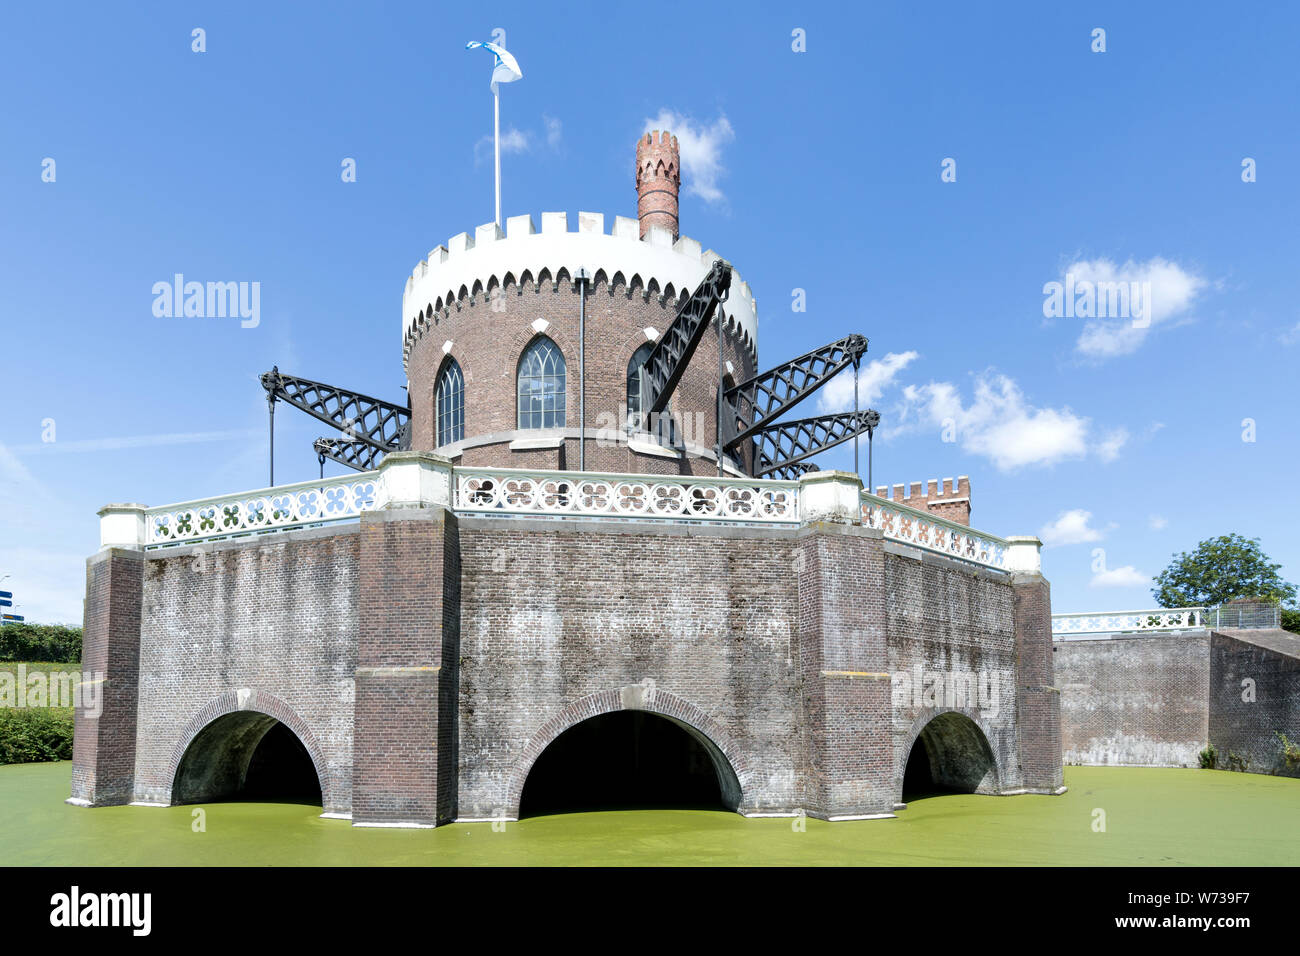 Museum De Cruquius, which occupies the old Cruquius steam pumping station. It is thought to be the largest steam engine ever built. Stock Photo